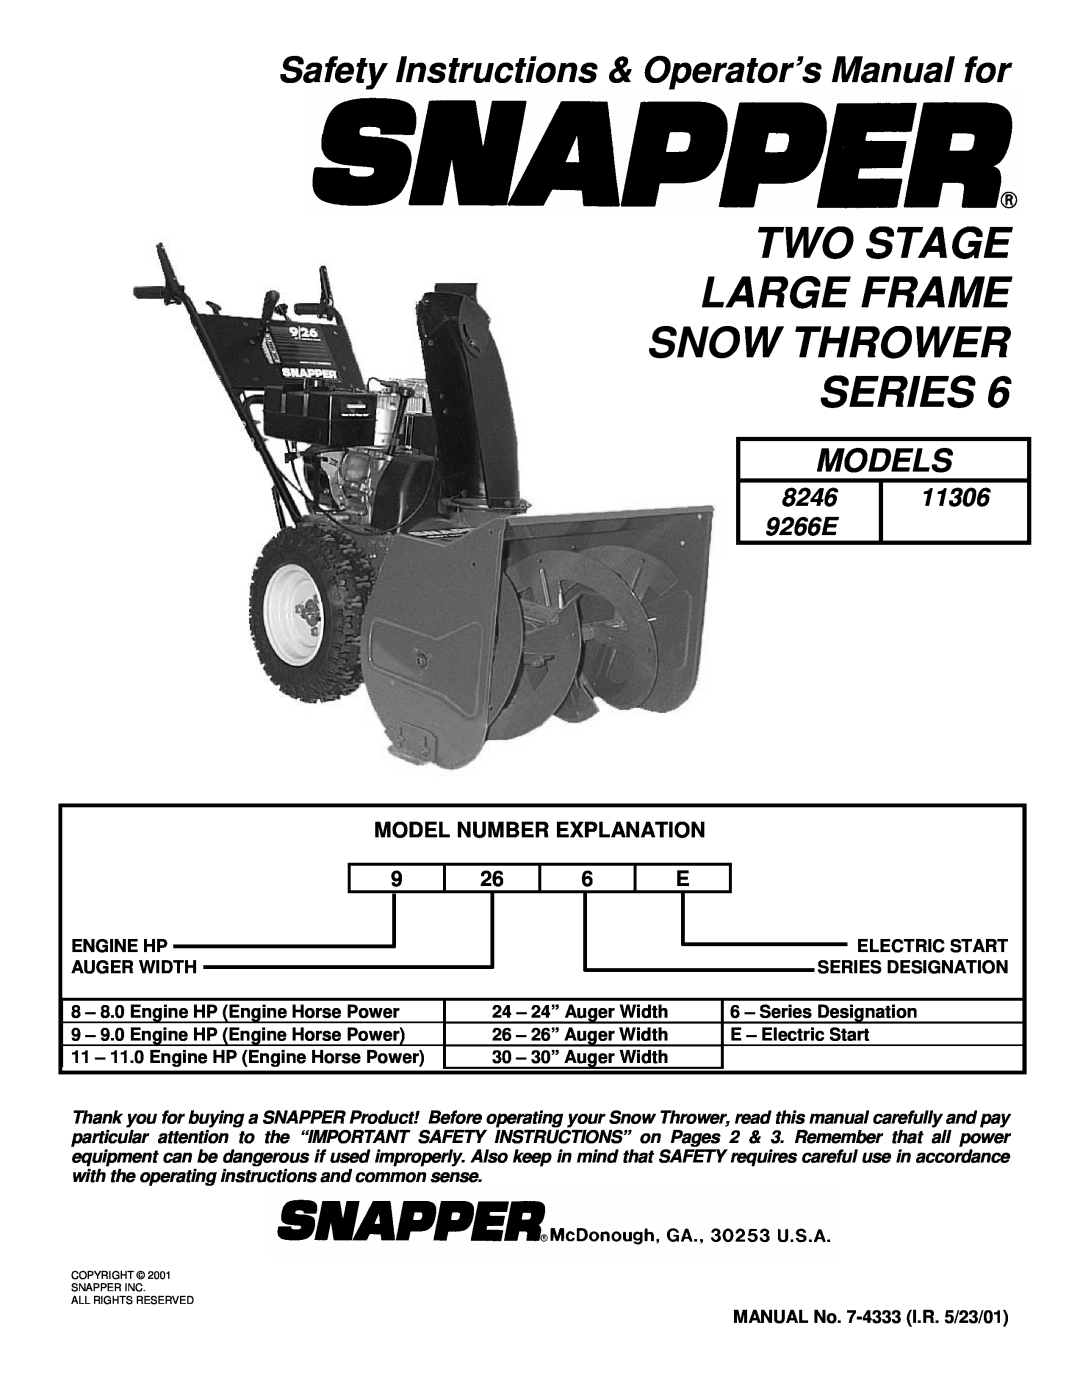 Snapper 8246, 9266E, 11306, 9266 important safety instructions Safety Instructions & Operator’s Manual for, Models 